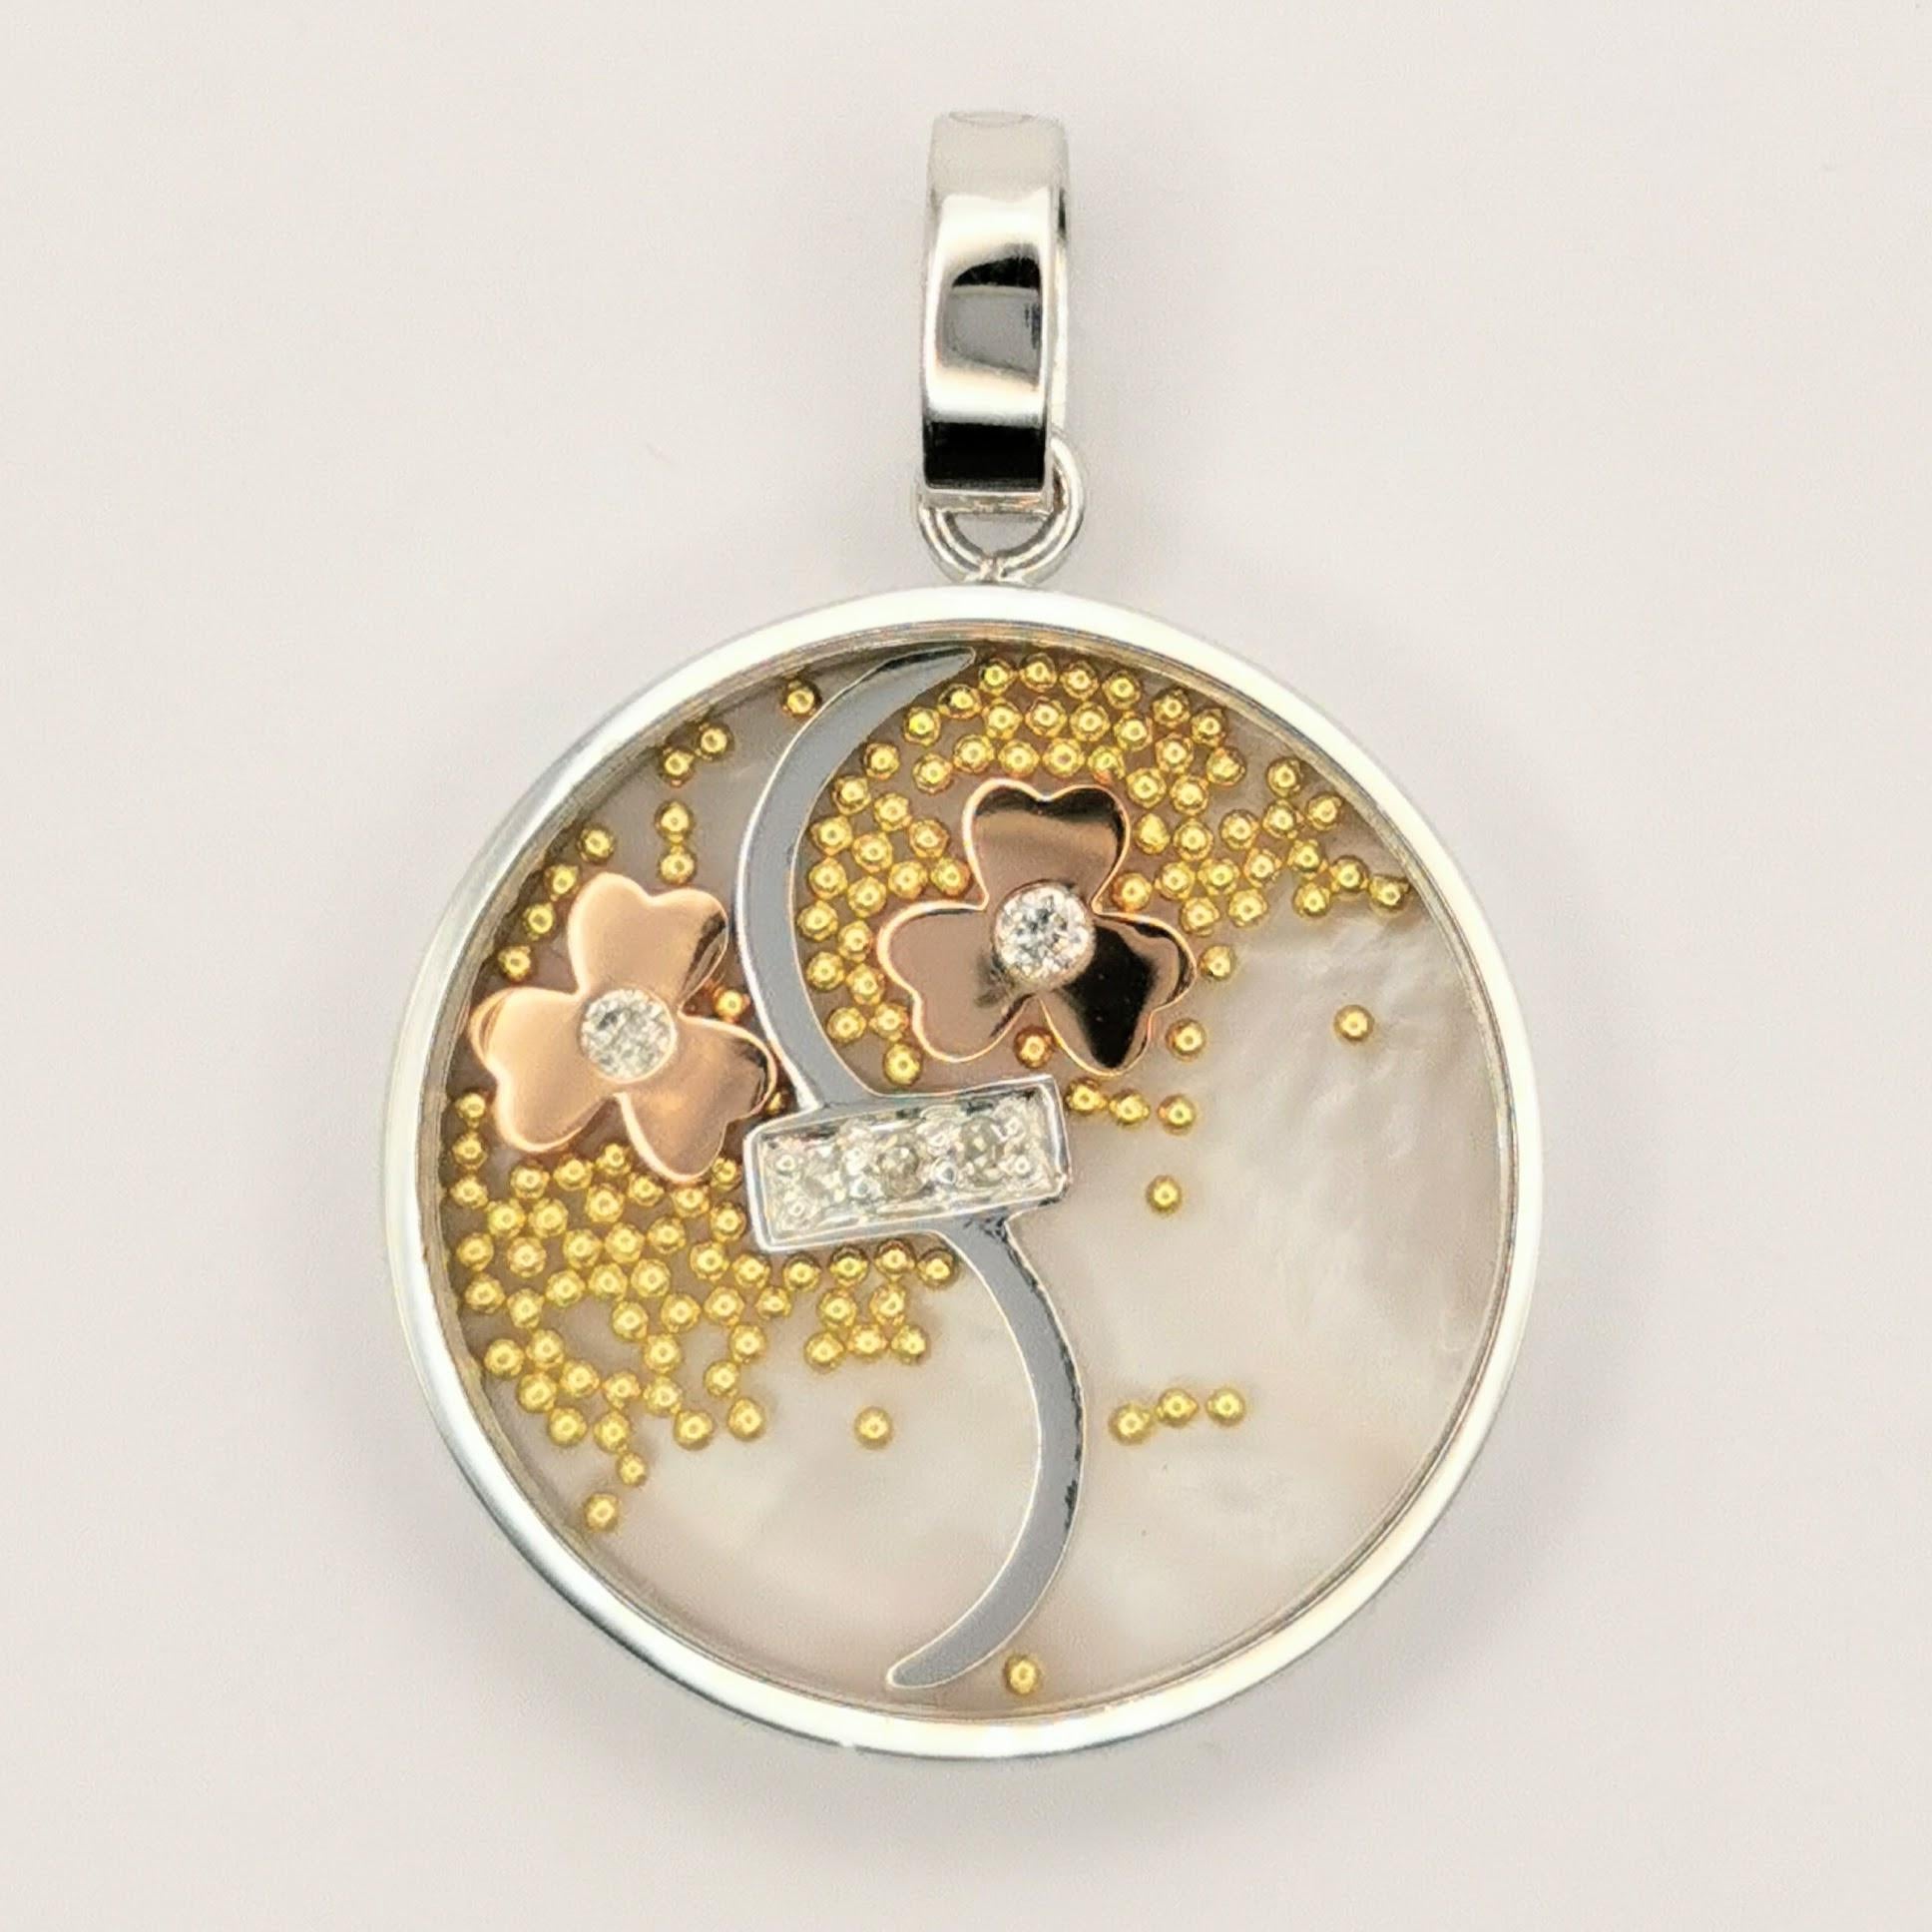 This stunning Happy Diamonds flowers pendant is the perfect choice for anyone looking for a unique and stylish accessory. The pendant itself is made of high quality 18k gold and features a stunning design with tiny yellow gold balls, two rose gold